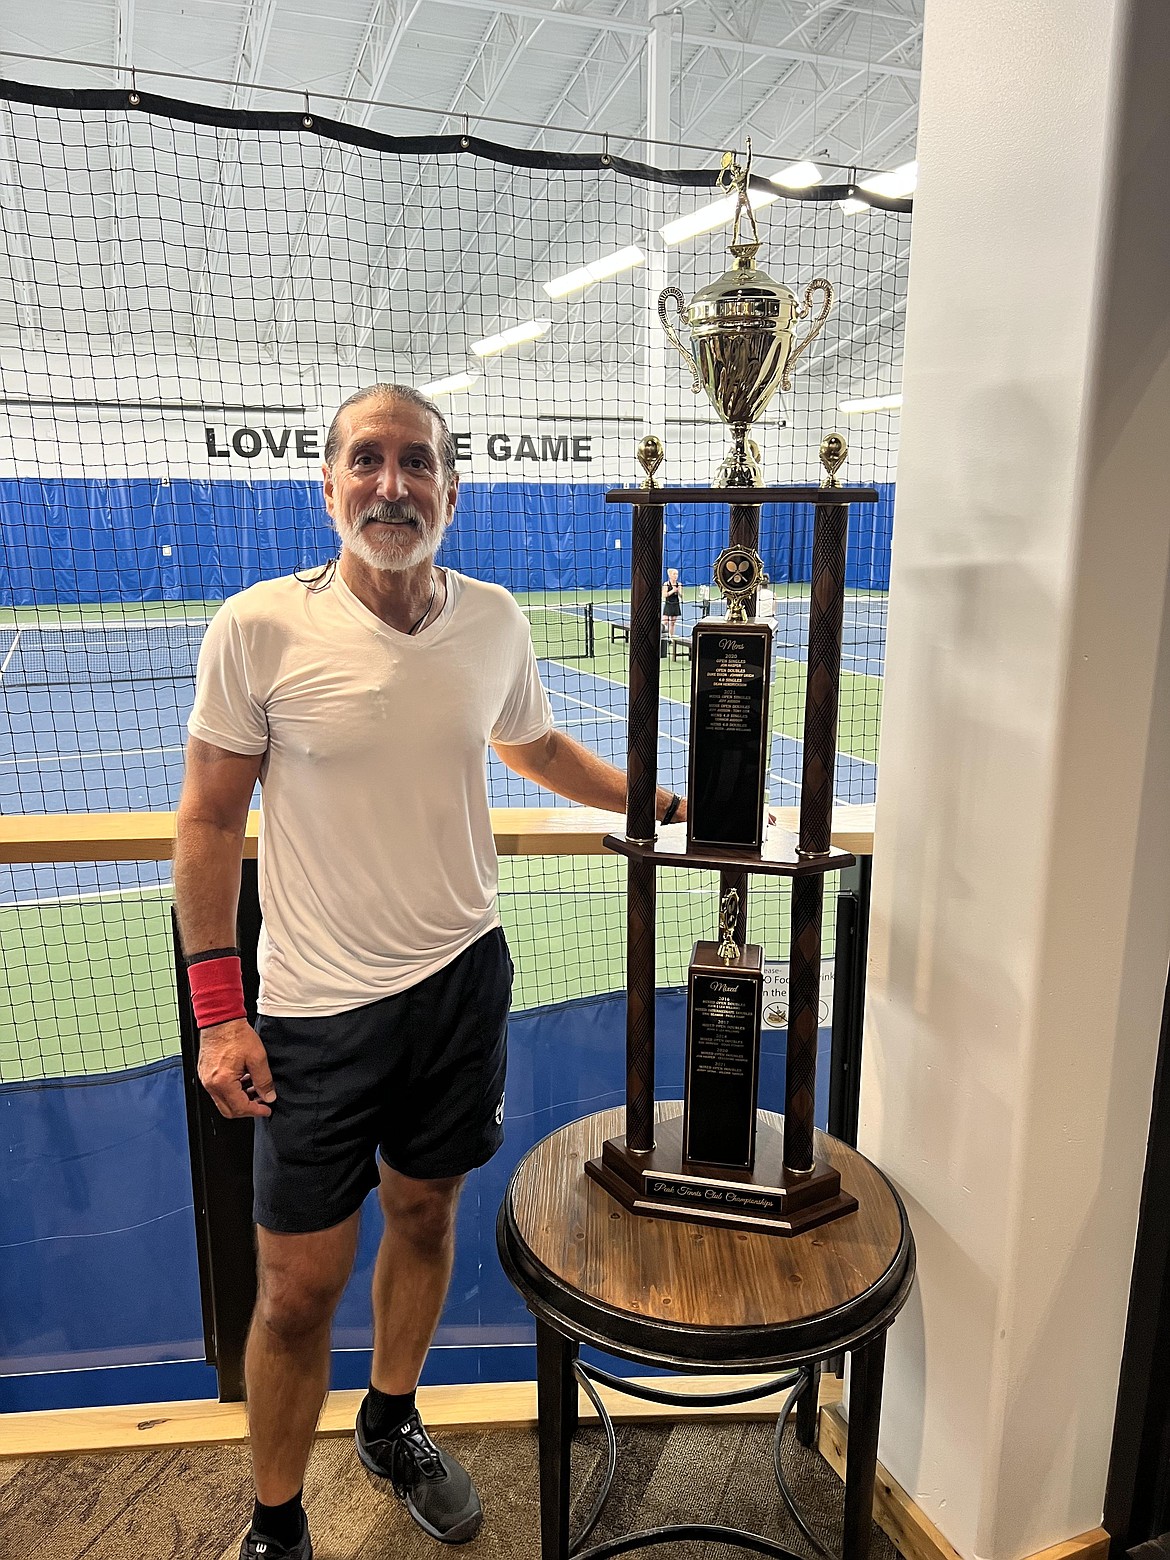 Courtesy photo
The men's 4.0 singles champion in the recent Peak Hayden tennis member tournament was Eric Seaman, who defeated Larry West 6-4, 7-5.